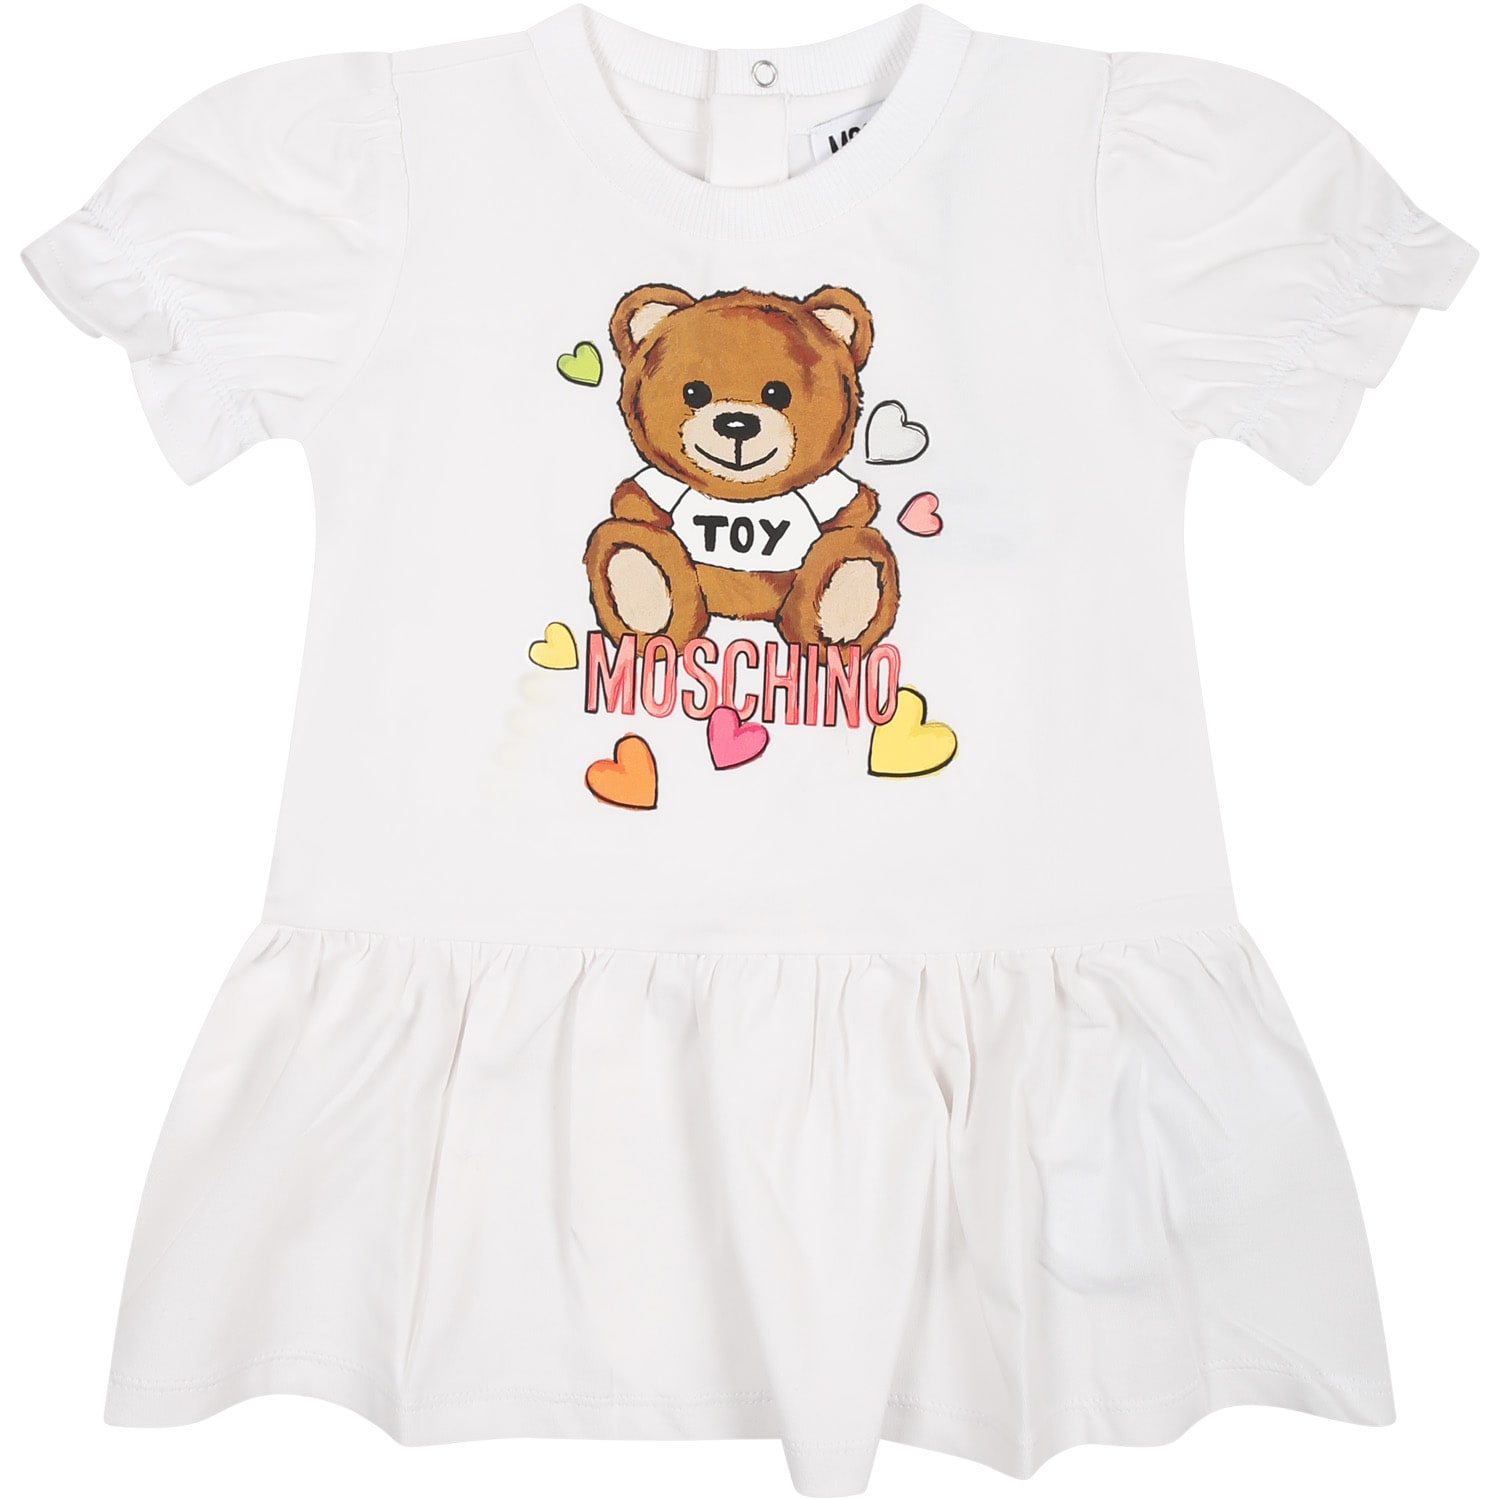 Moschino White Dress For Baby Girl With Teddy Bear Print